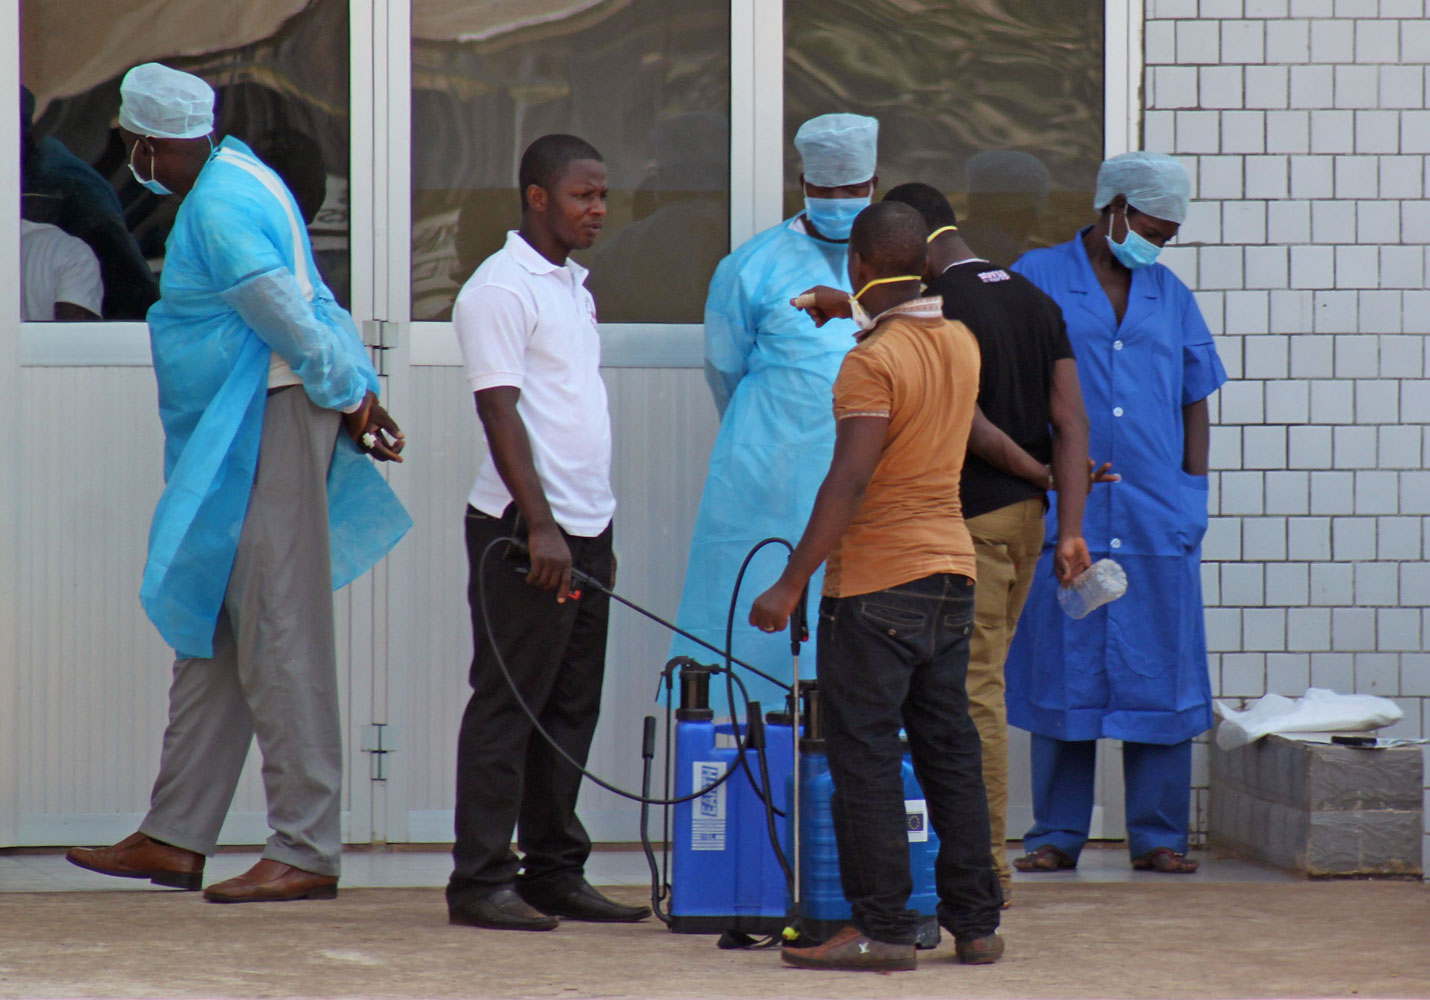 Medical personnel at the emergency entrance of a hospital receive suspected Ebola virus patients in Conakry, Guinea, March 29, 2014.